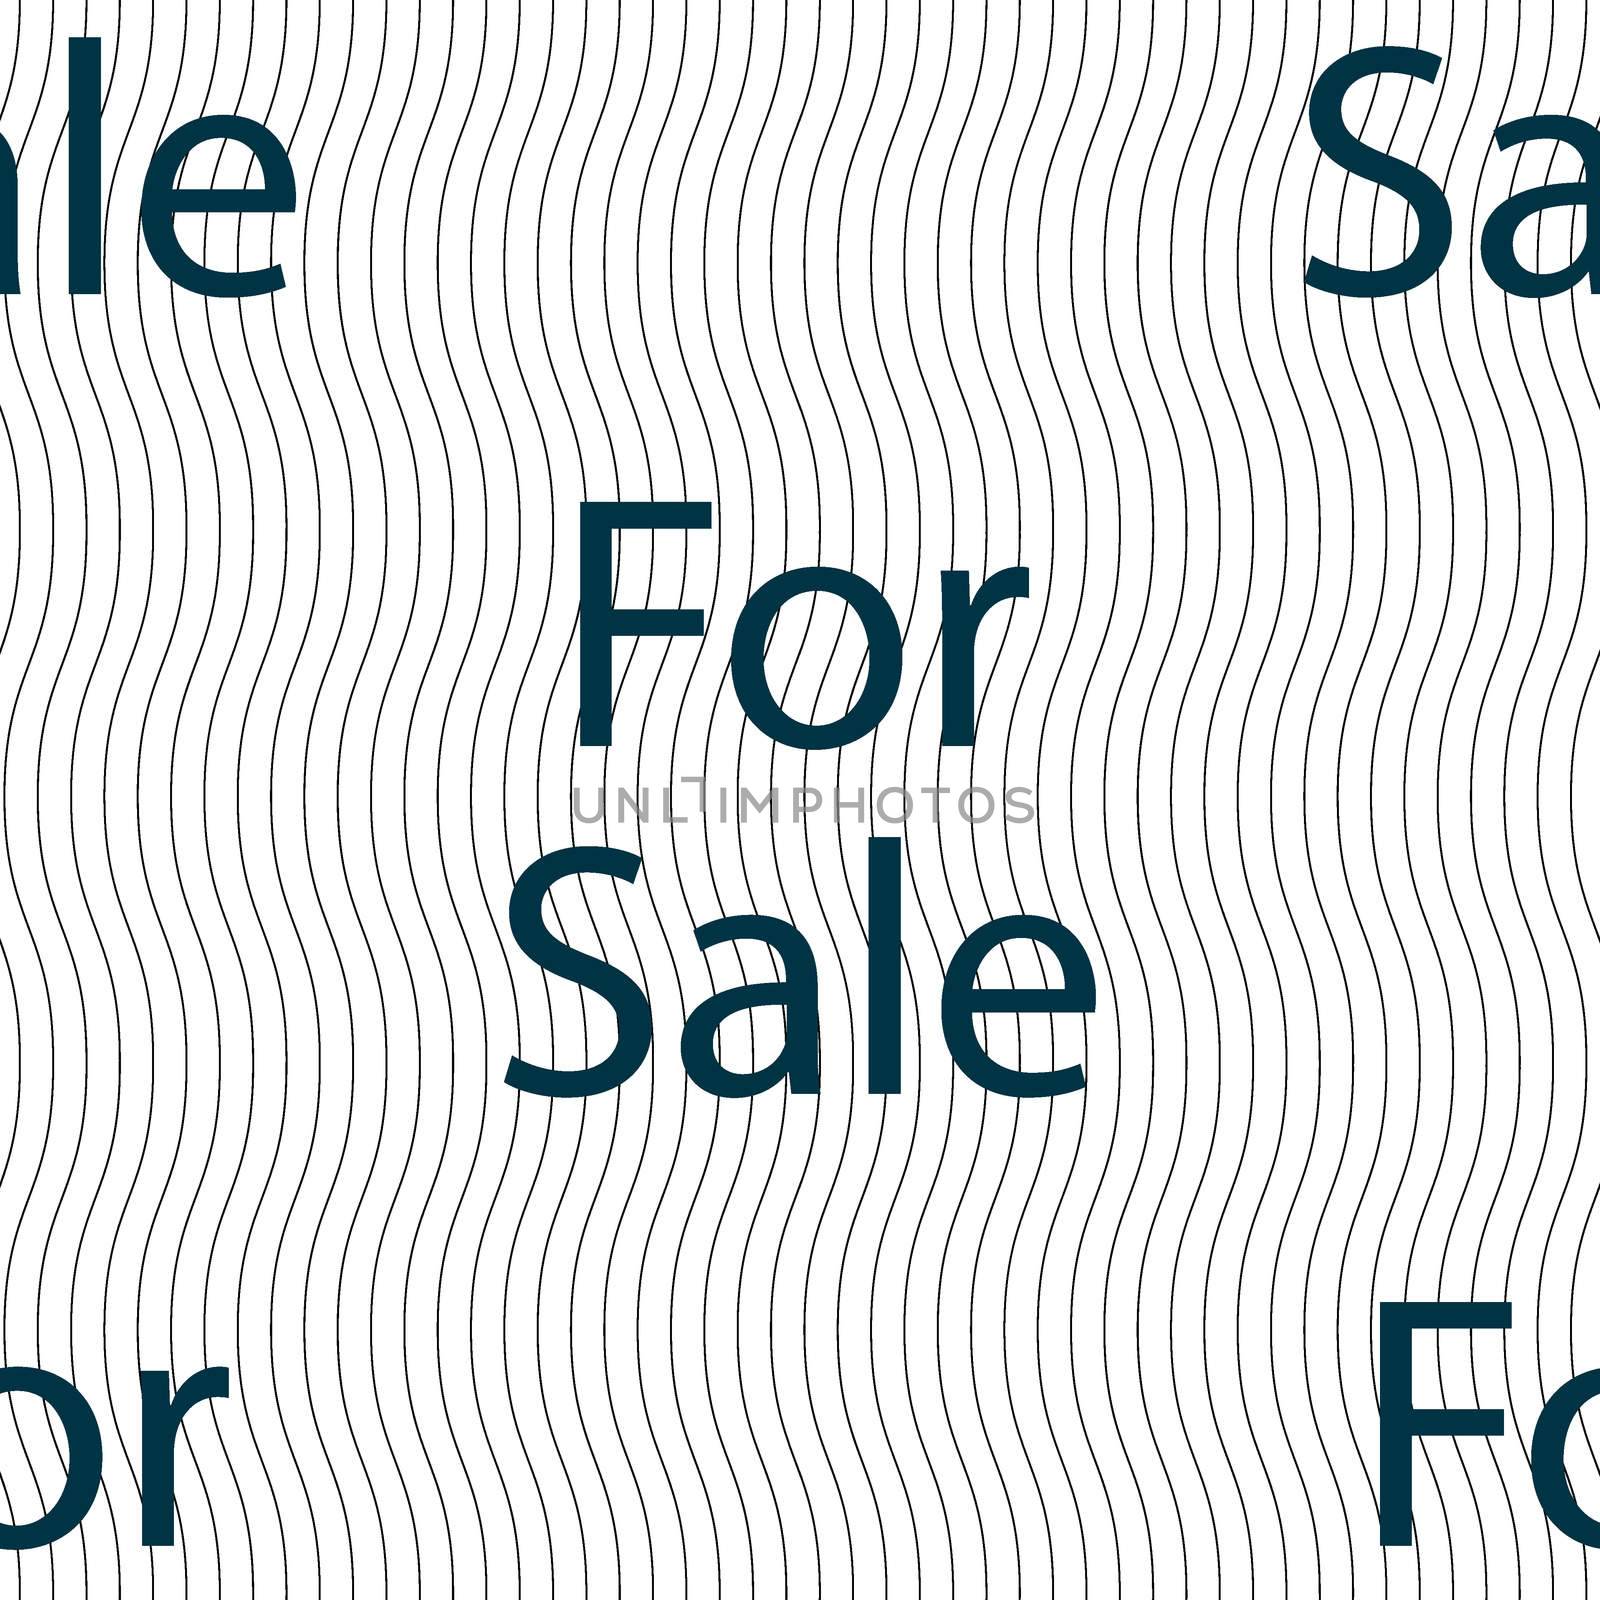 For sale sign icon. Real estate selling. Seamless pattern with geometric texture. illustration